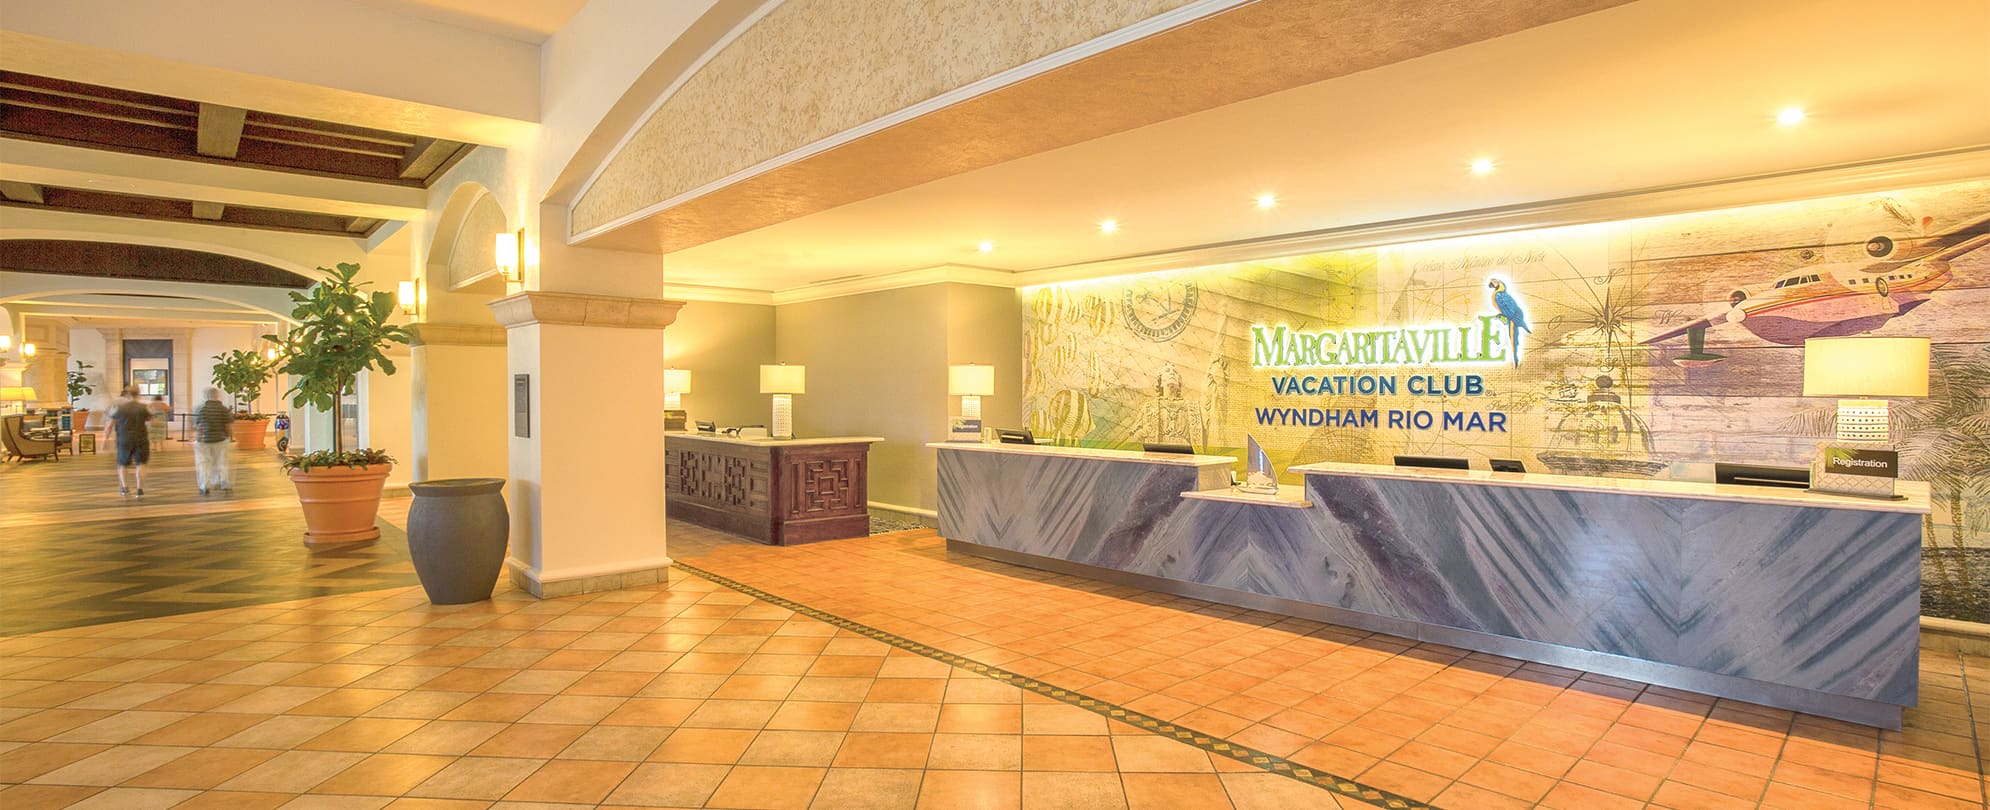 Lobby check-in counters at Margaritaville Vacation Club by Wyndham - Rio Mar, a Puerto Rico timeshare resort.